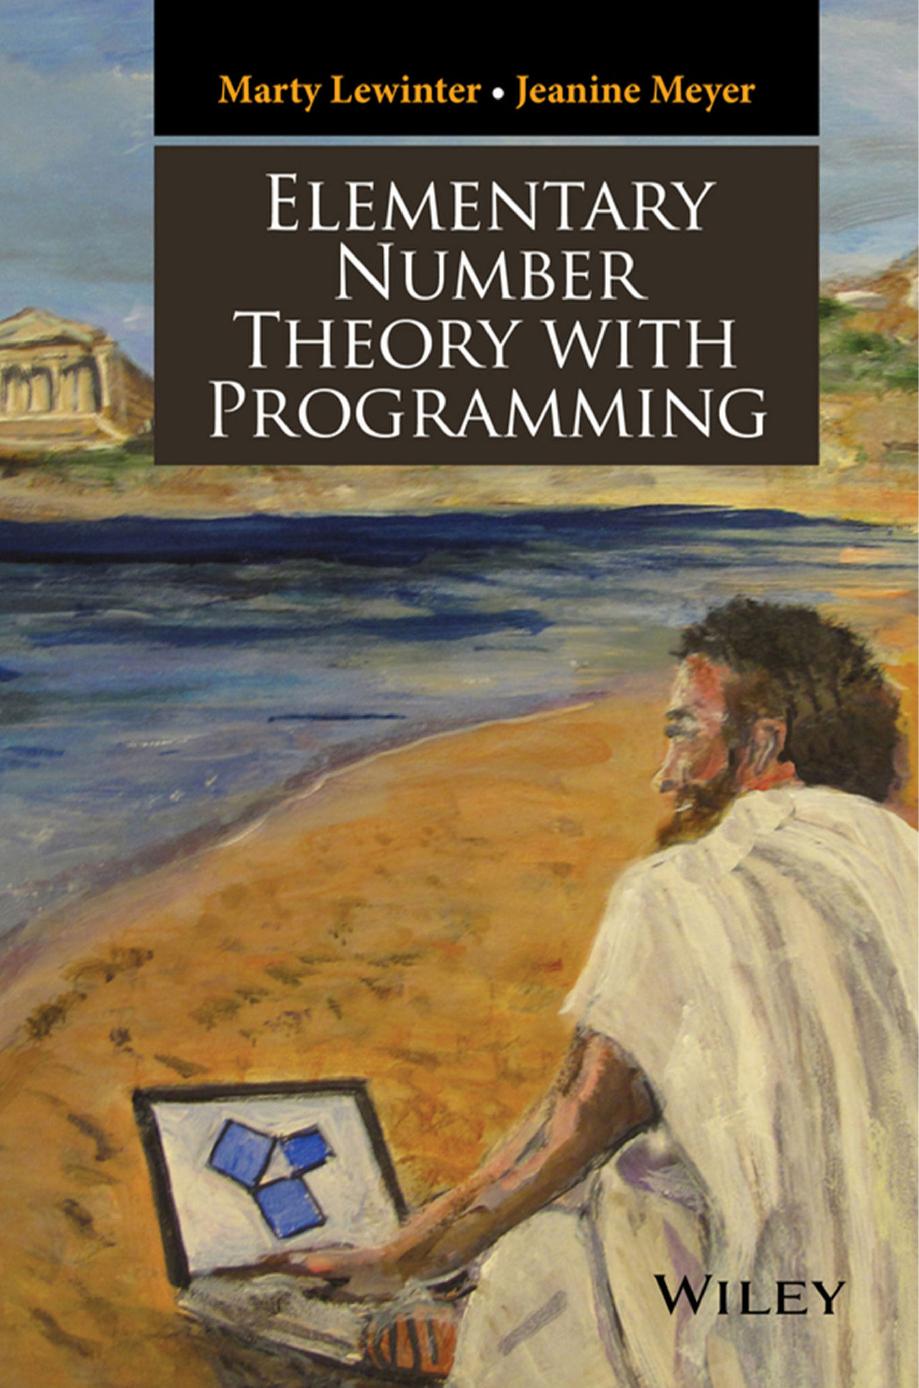 Elementary number theory with programming 2016.pdf